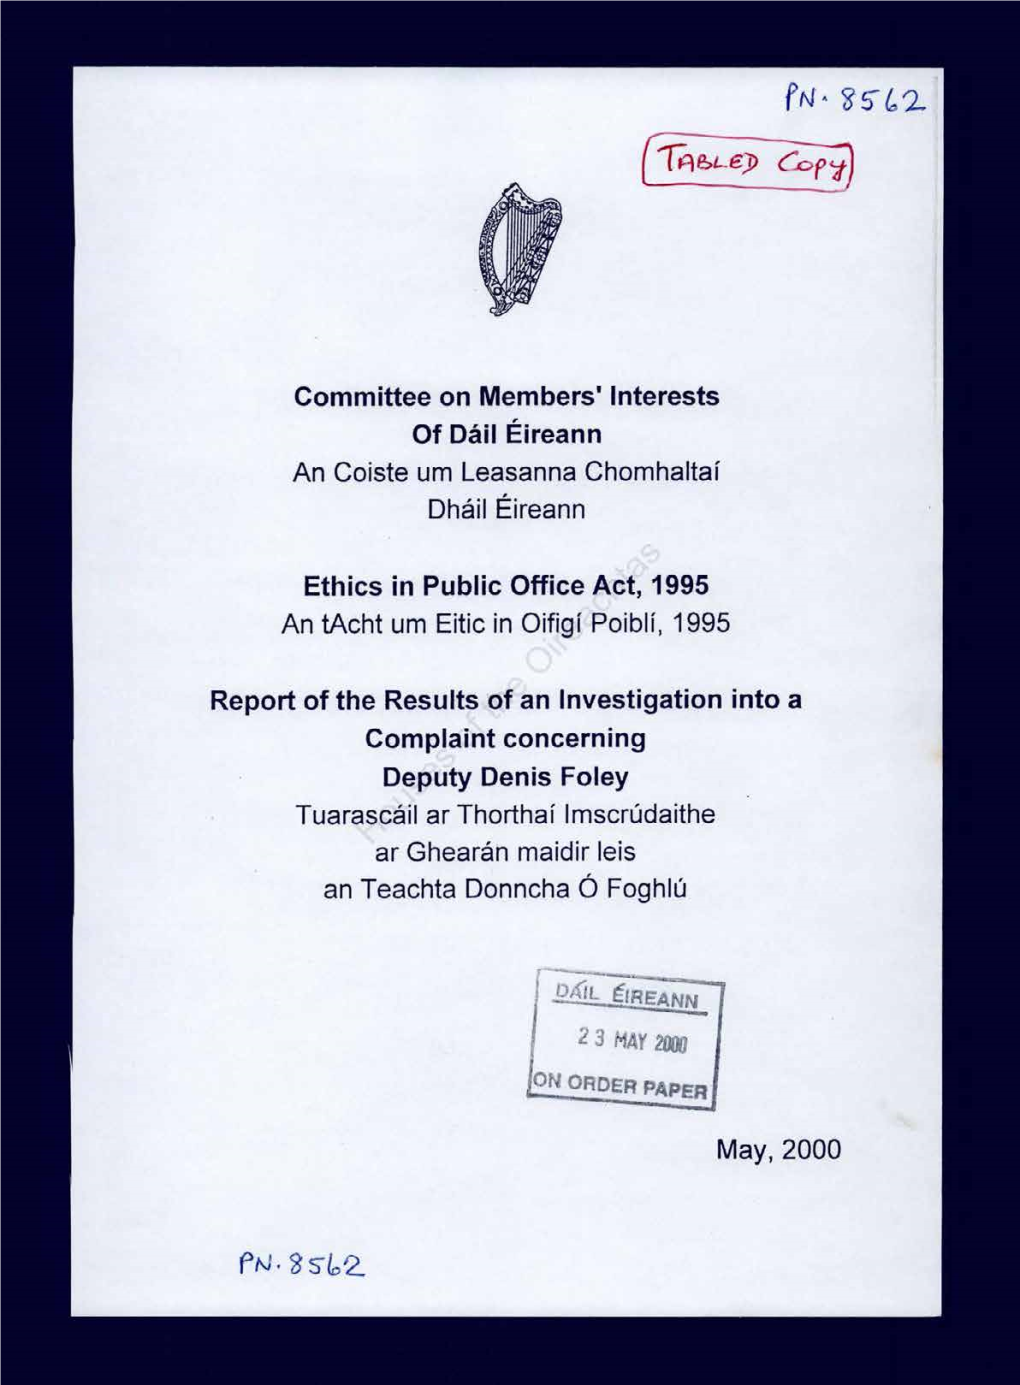 Report of the Results of an Investigation Into a Complaint